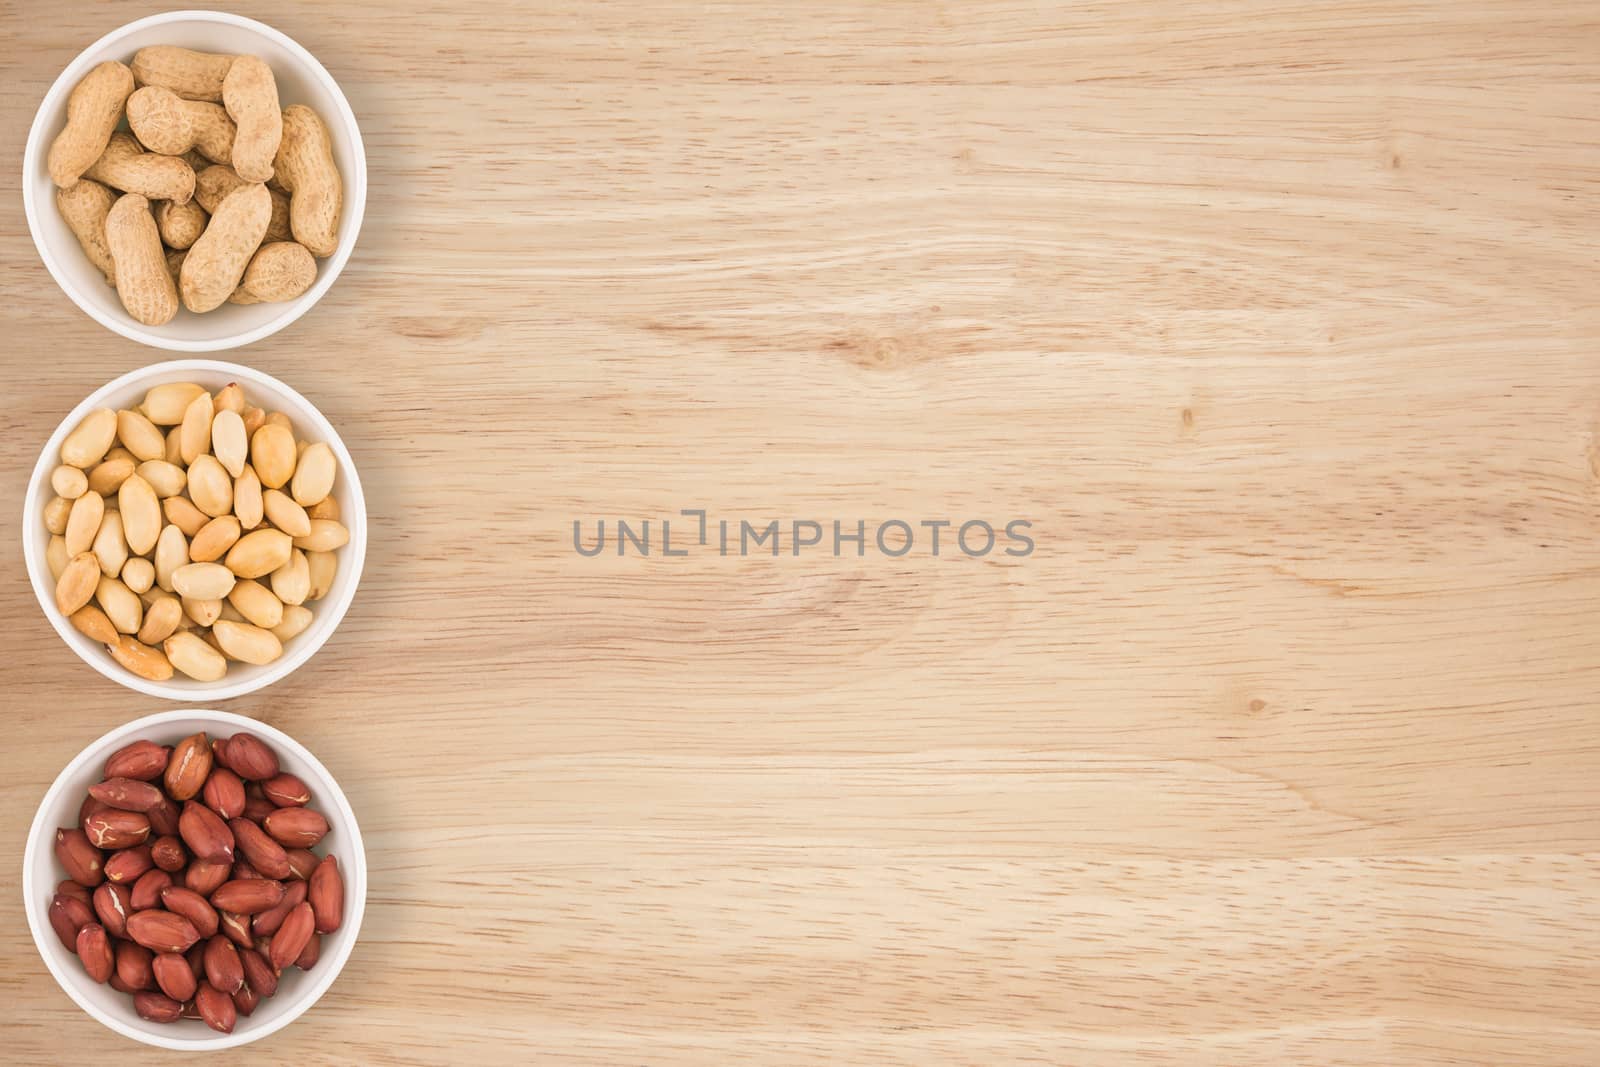 Some peanuts in a cyan bowl on a wooden table.